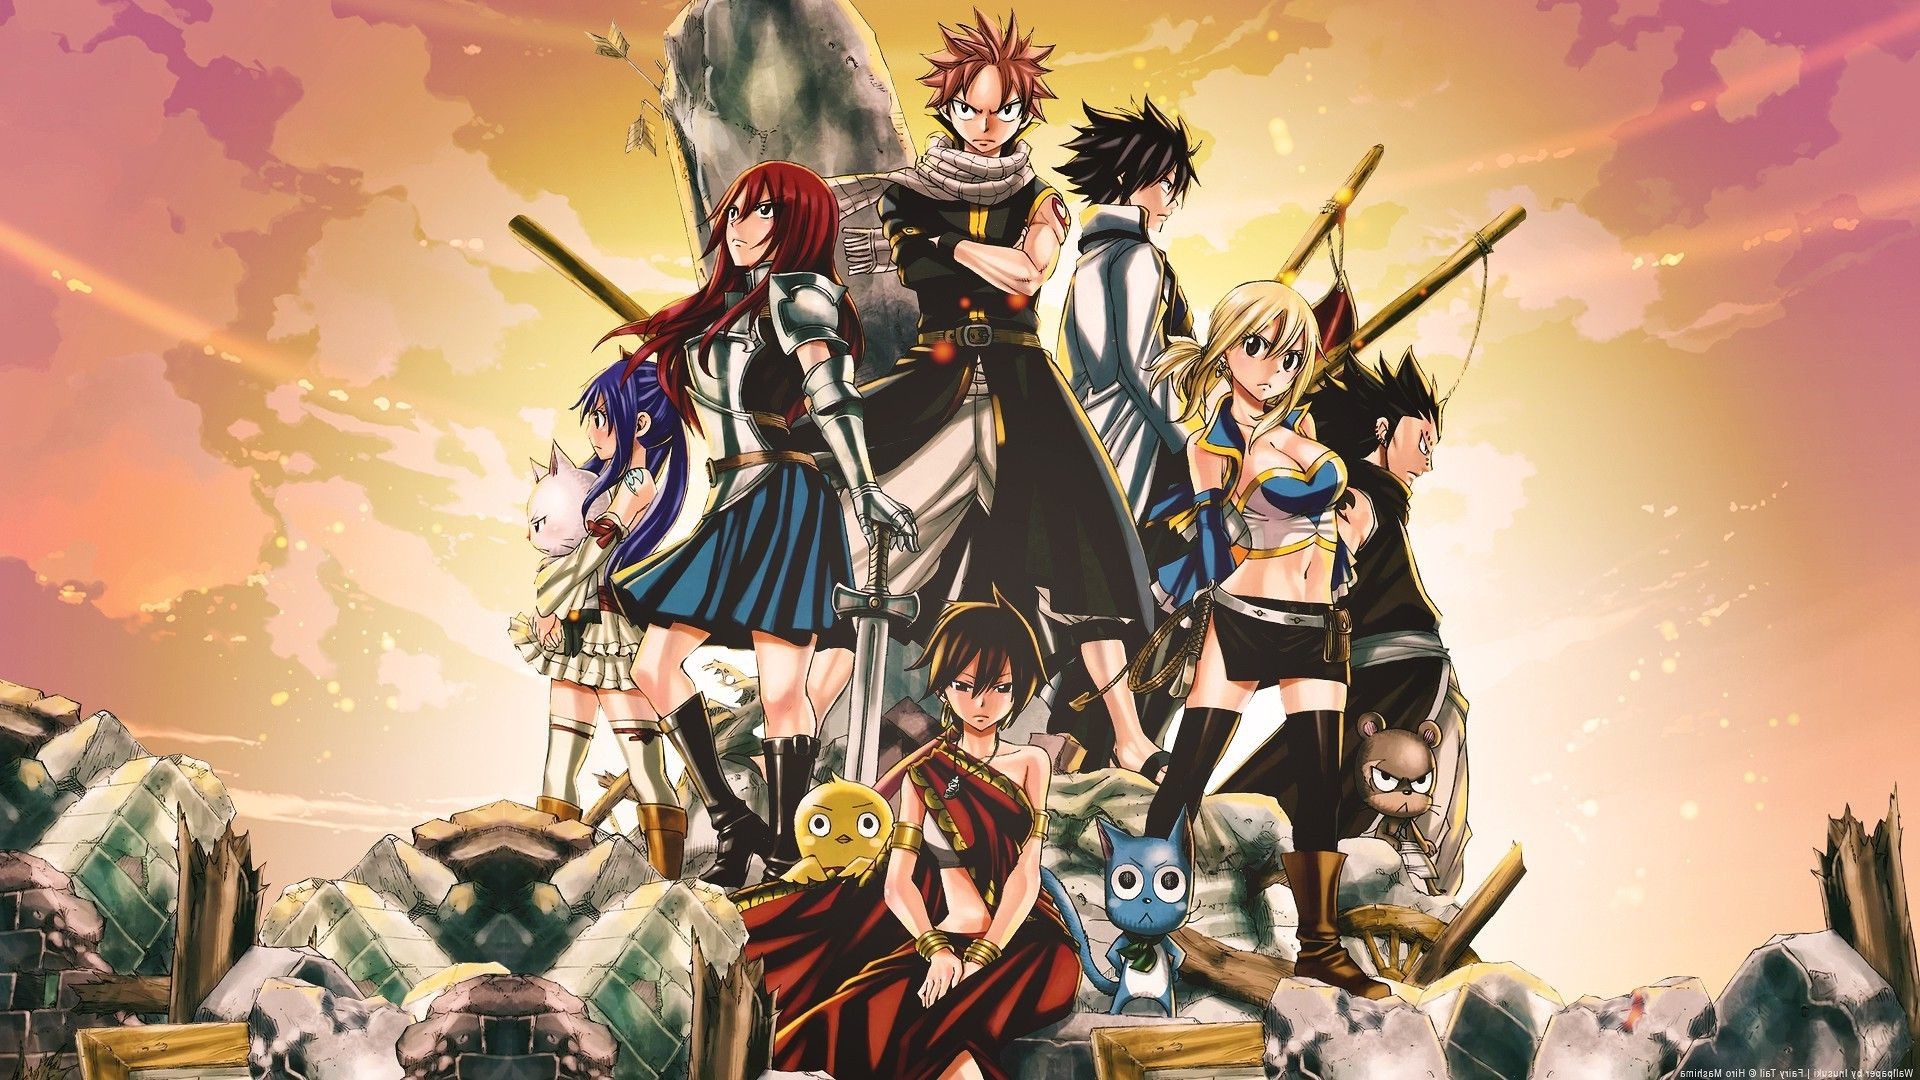 1920x1080 Fairy Tail Wallpapers 17 - 1920 X 1080 | stmed.net